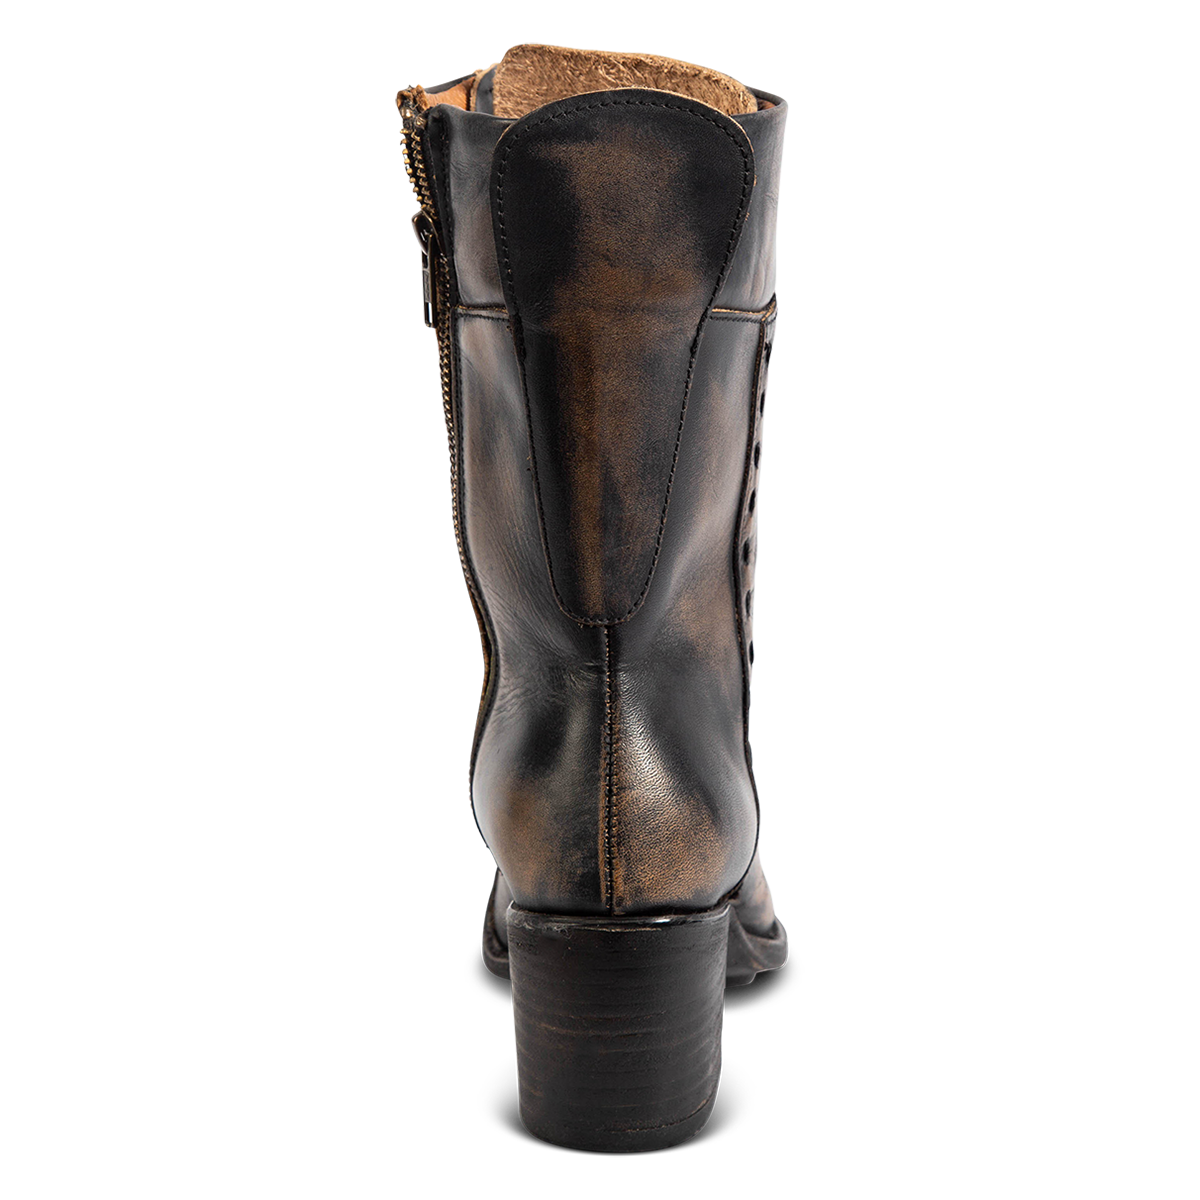 Back view showing stacked heel and working brass inside closure on FREEBIRD women's Dart black leather boot